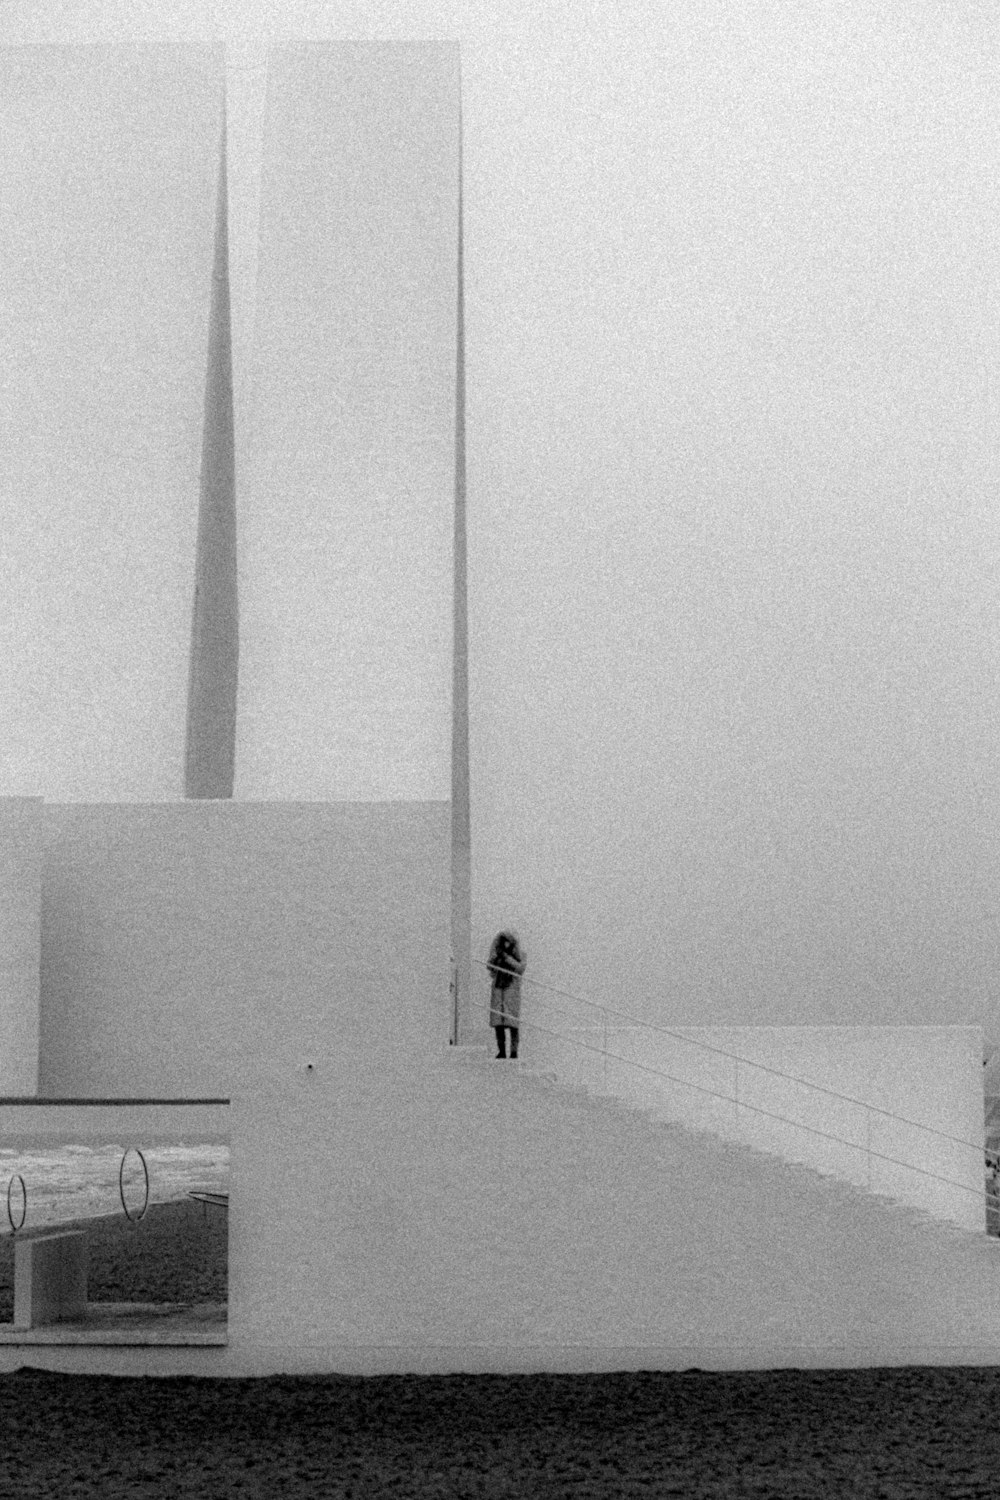 a black and white photo of a person standing on a building